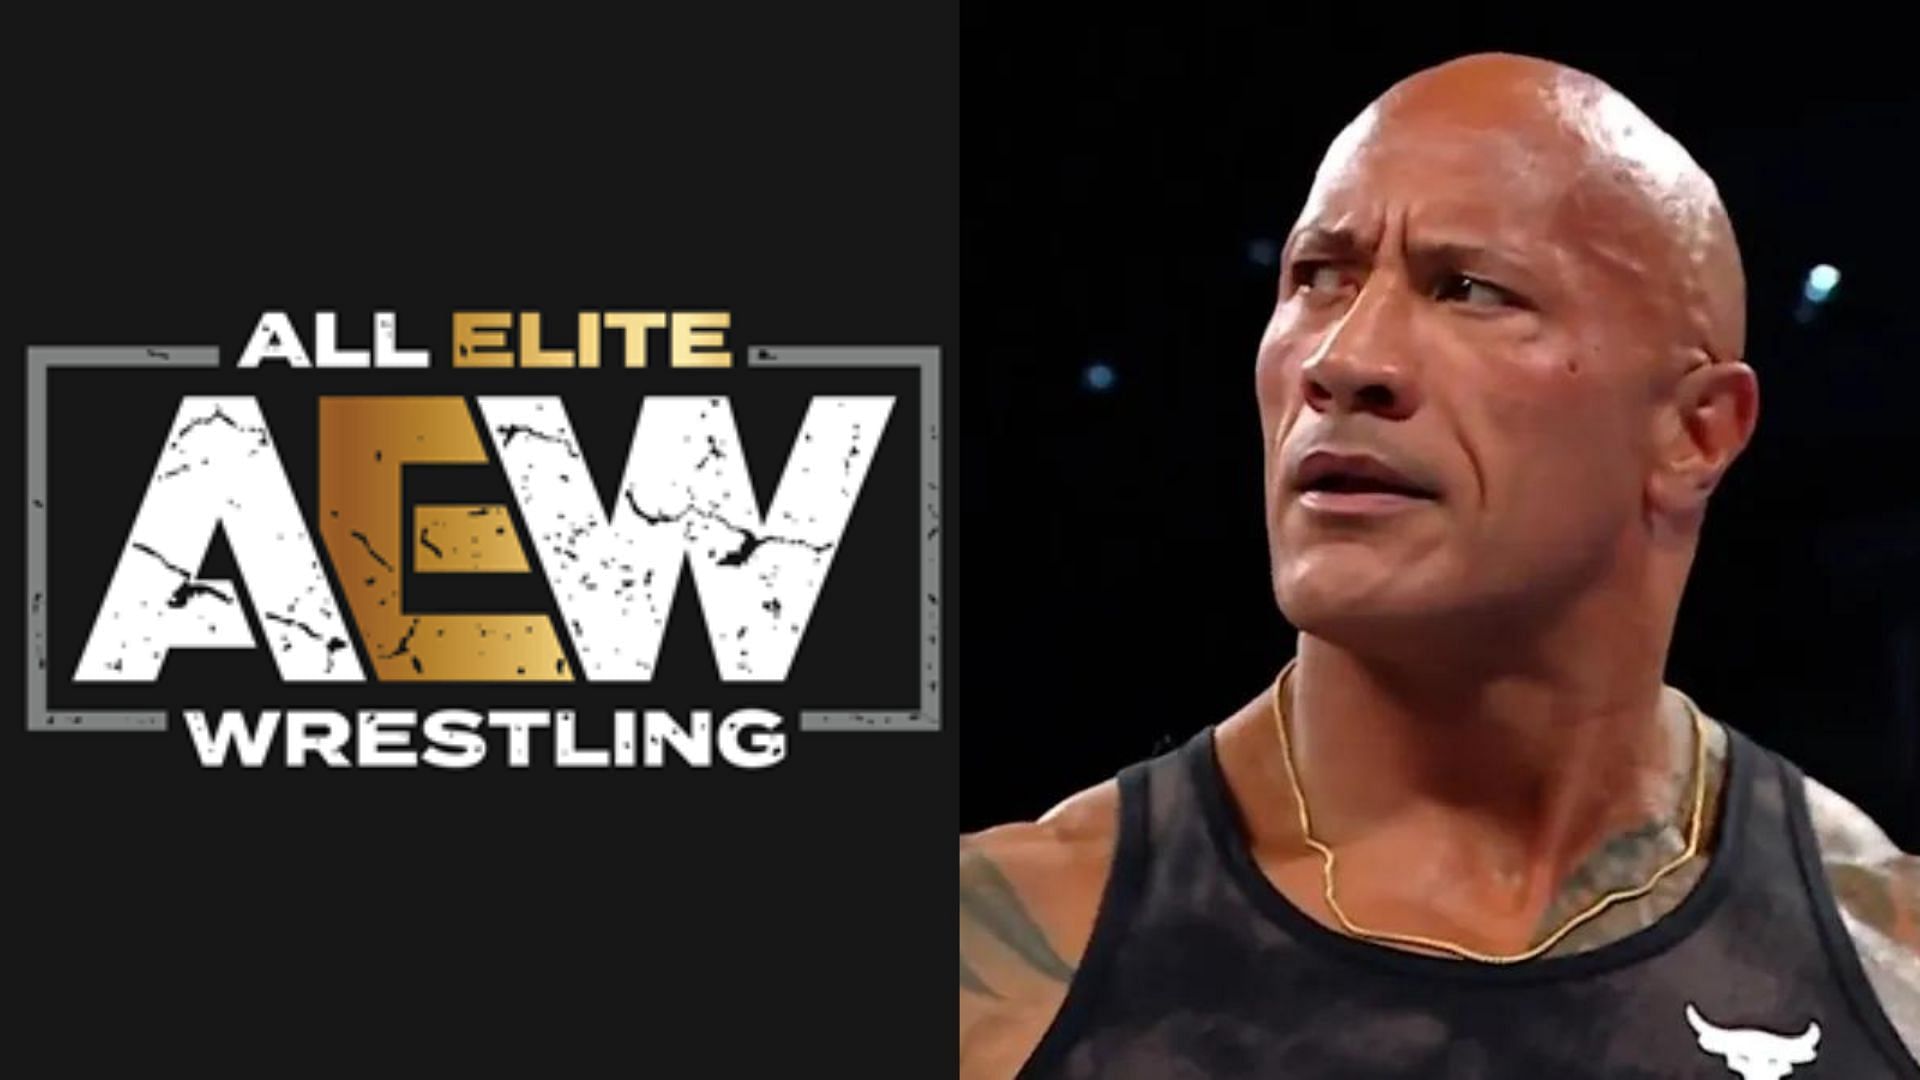 The Rock is an eight-time WWE Champion